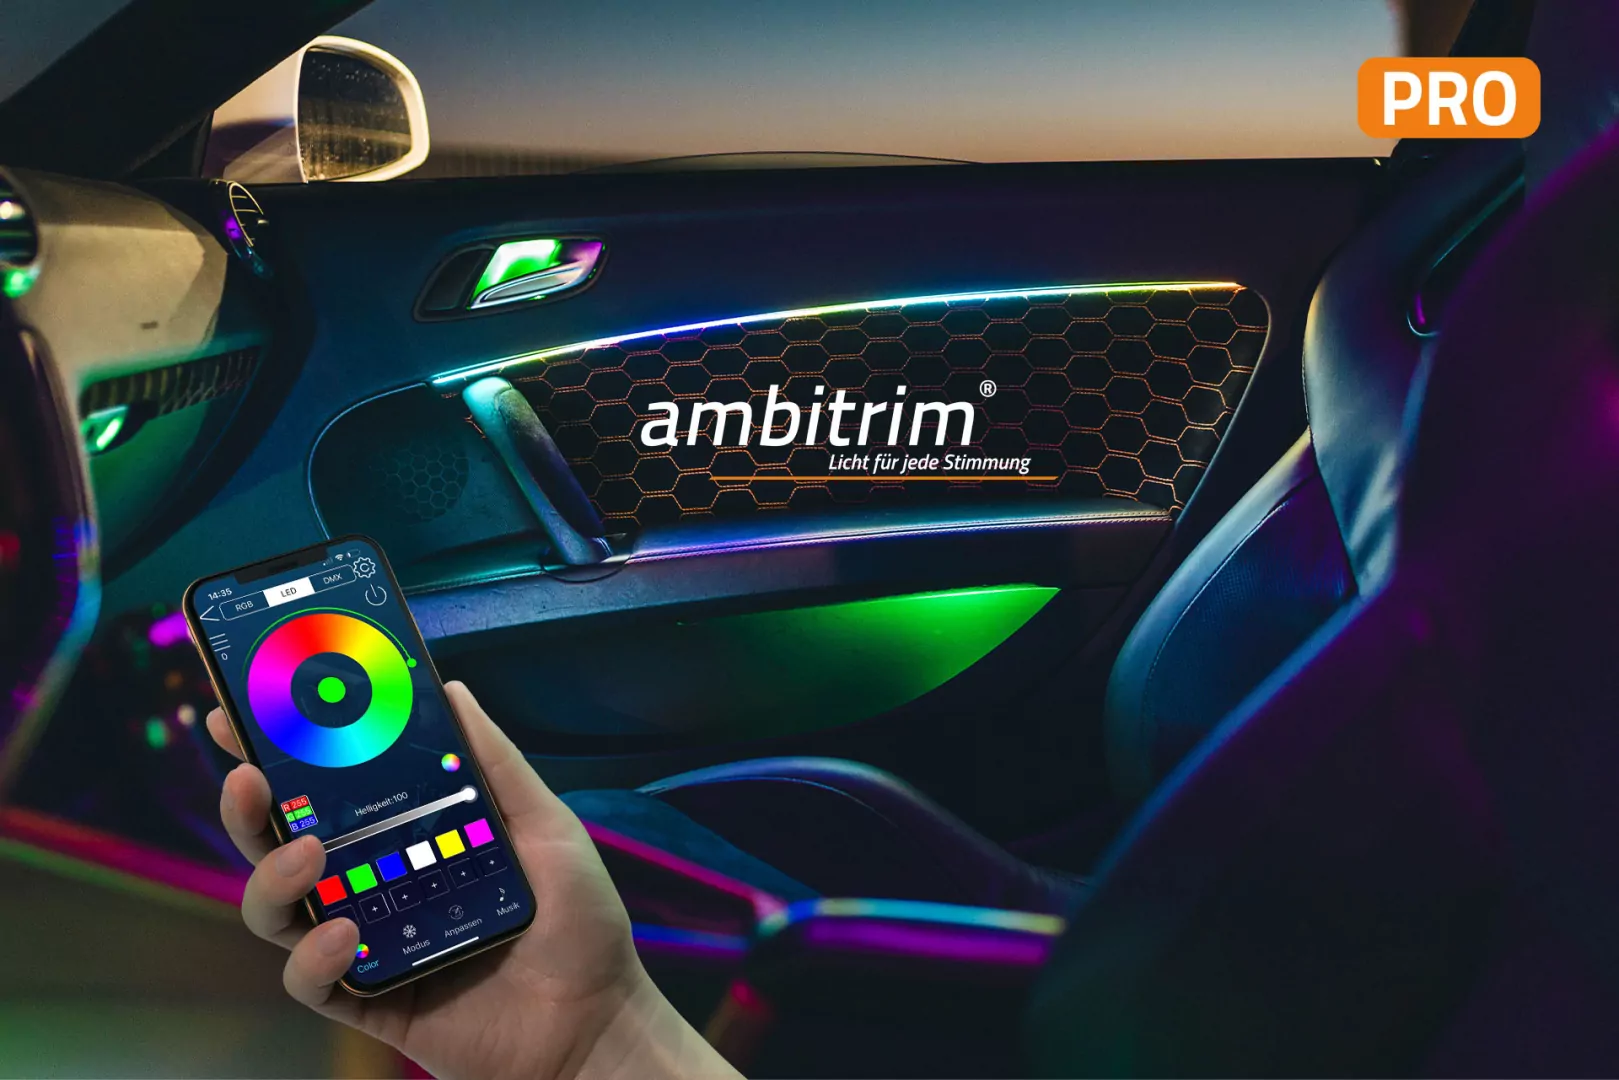 https://individualiseyourcar.com/images/product_images/popup_images/ambitrim%20Digital%20PRO/IYC_ambitrim_digital_PRO_RGB_LED_Titelbild_3_pro.webp